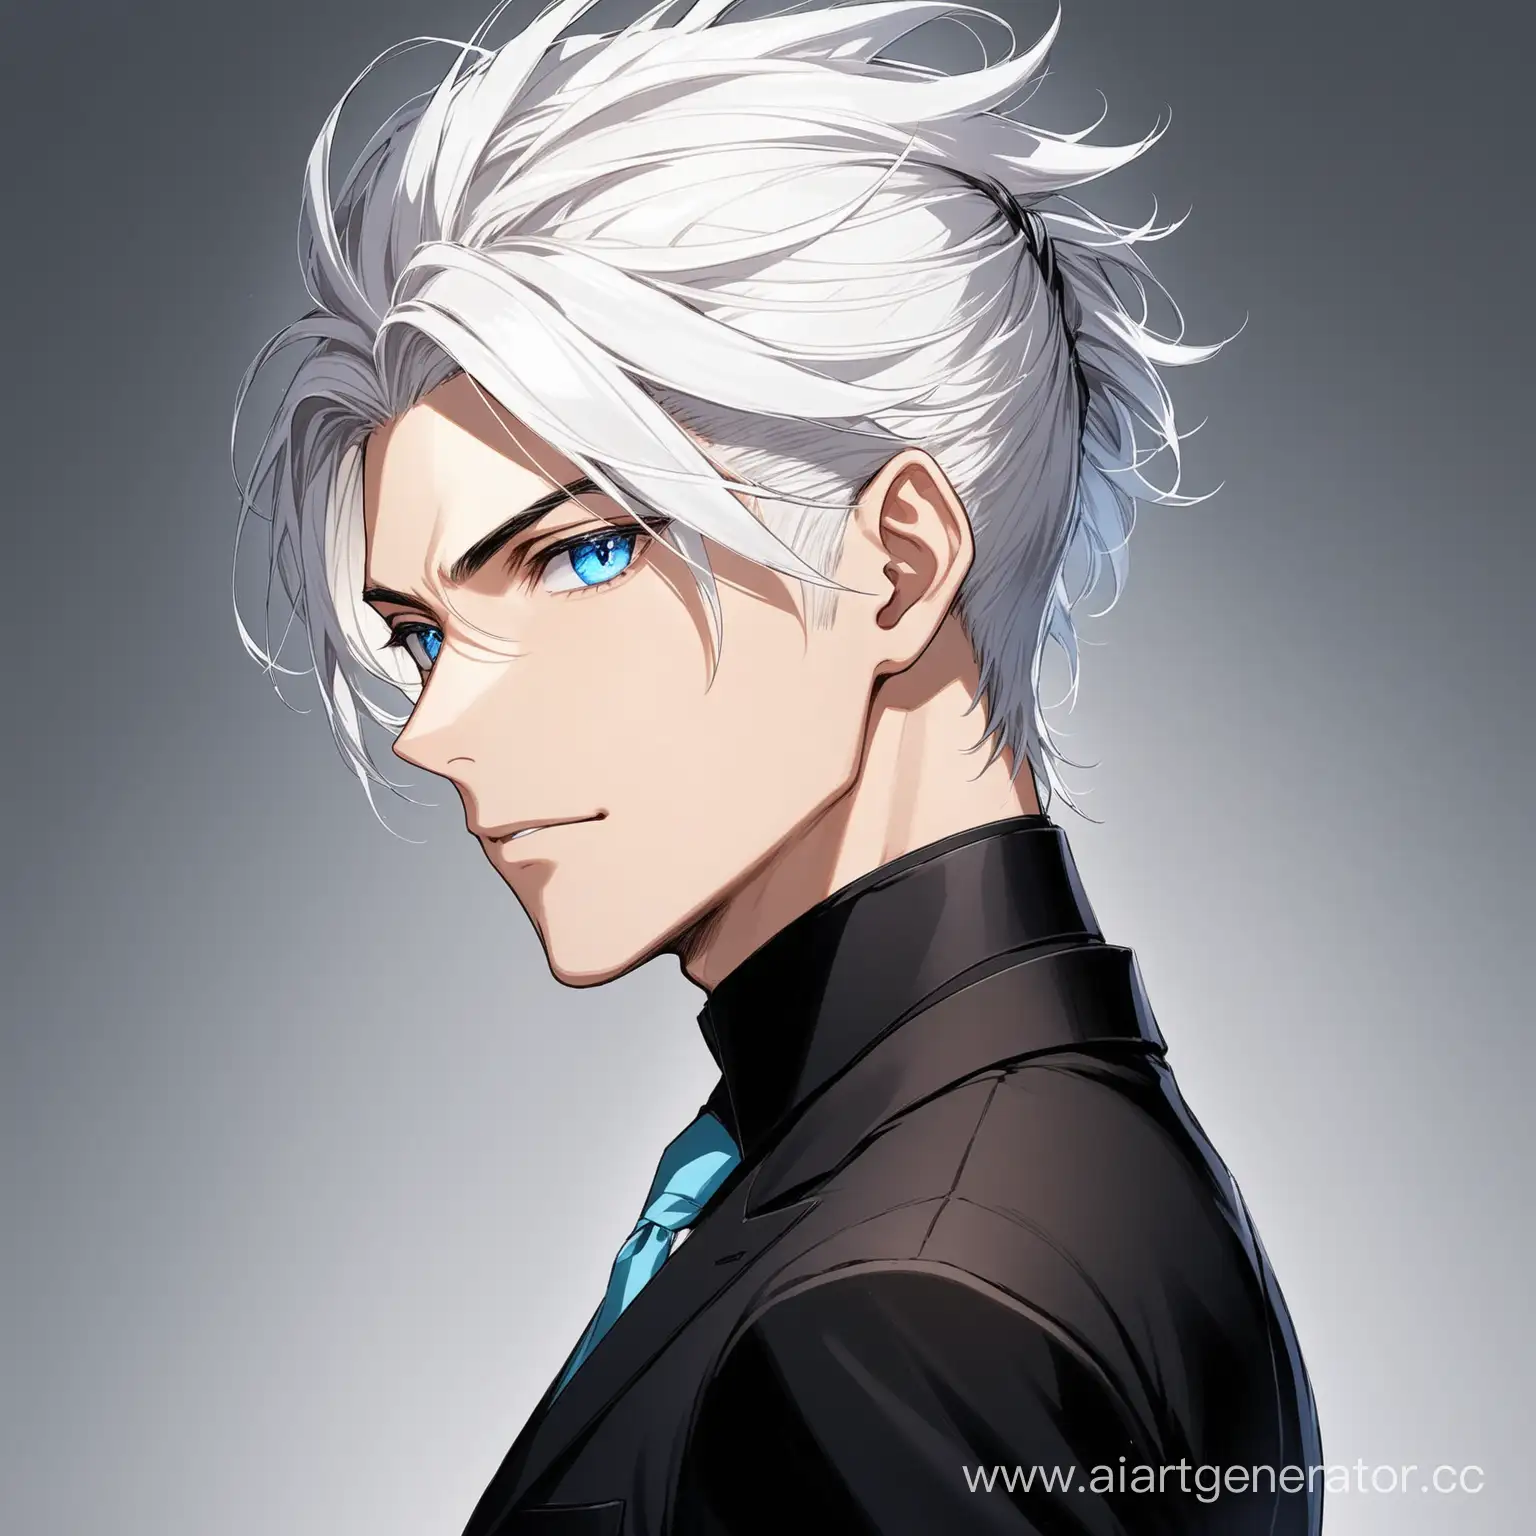 Elegant-Man-with-White-Hair-in-Black-Suit-and-Blue-Eyes